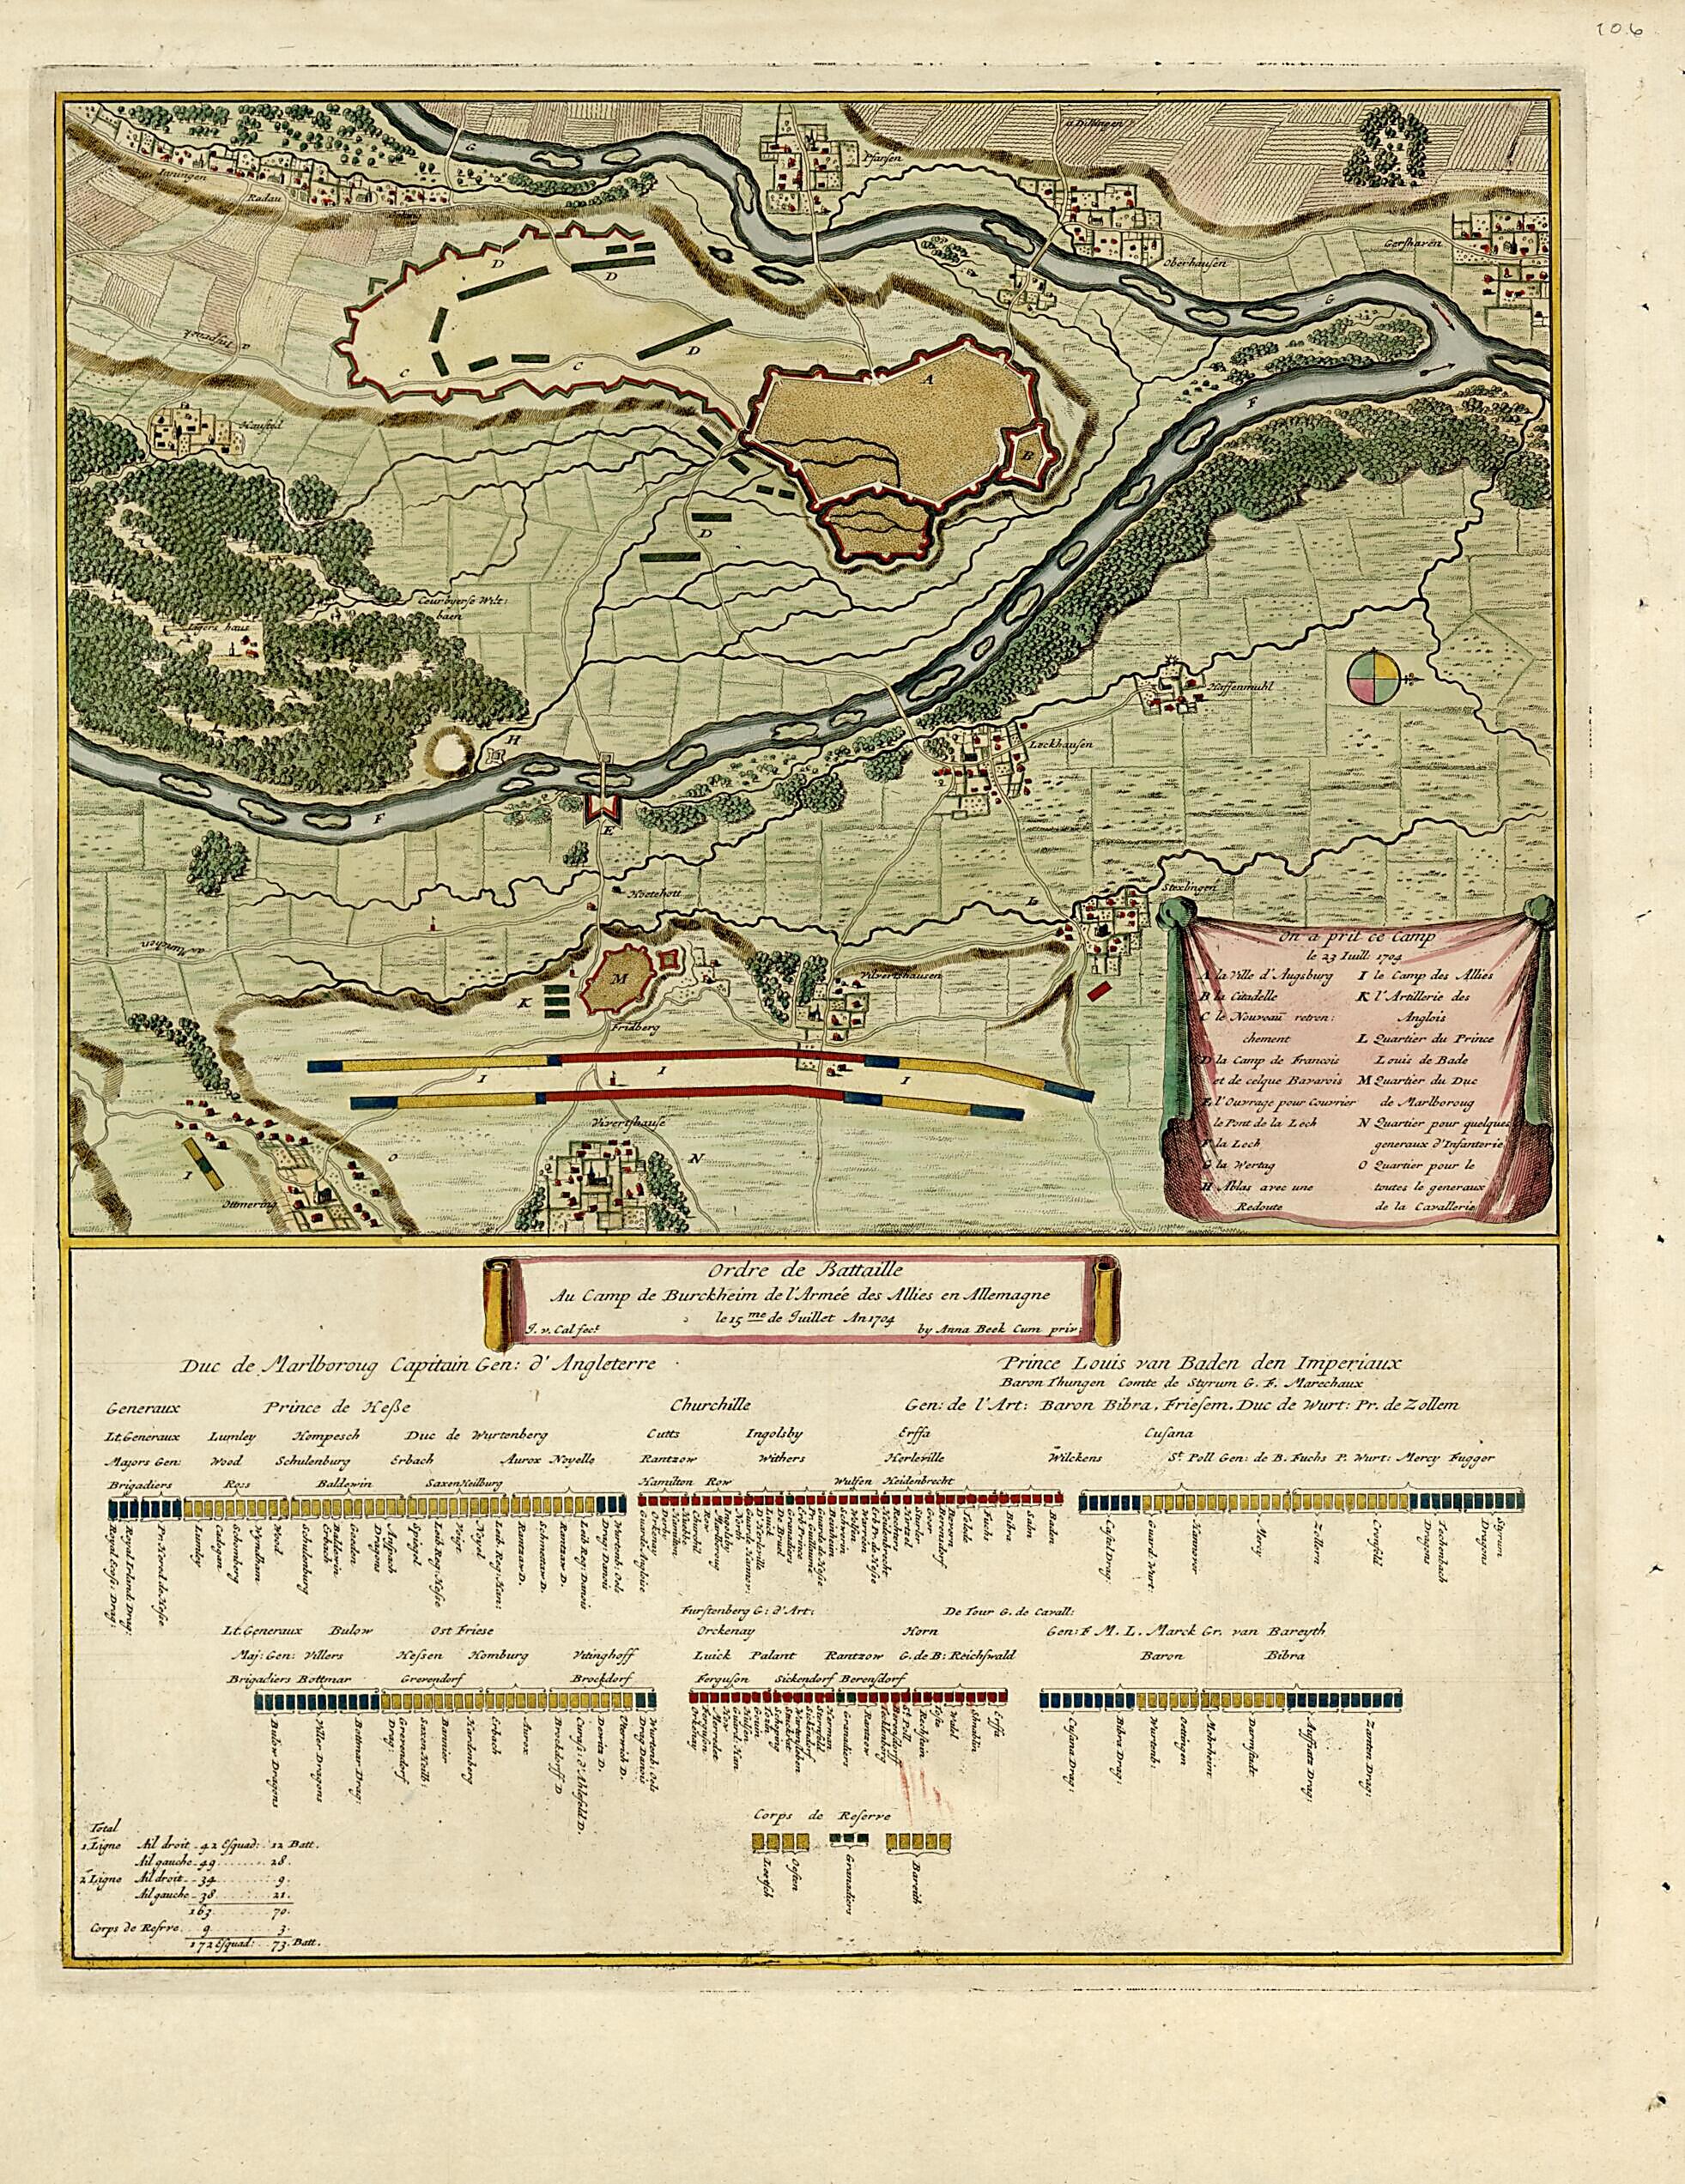 This old map of Ordre De Battaille Au Camp De Burkheim De...Allemagne from a Collection of Plans of Fortifications and Battles, 1684-from 1709 from 1709 was created by Anna Beeck in 1709